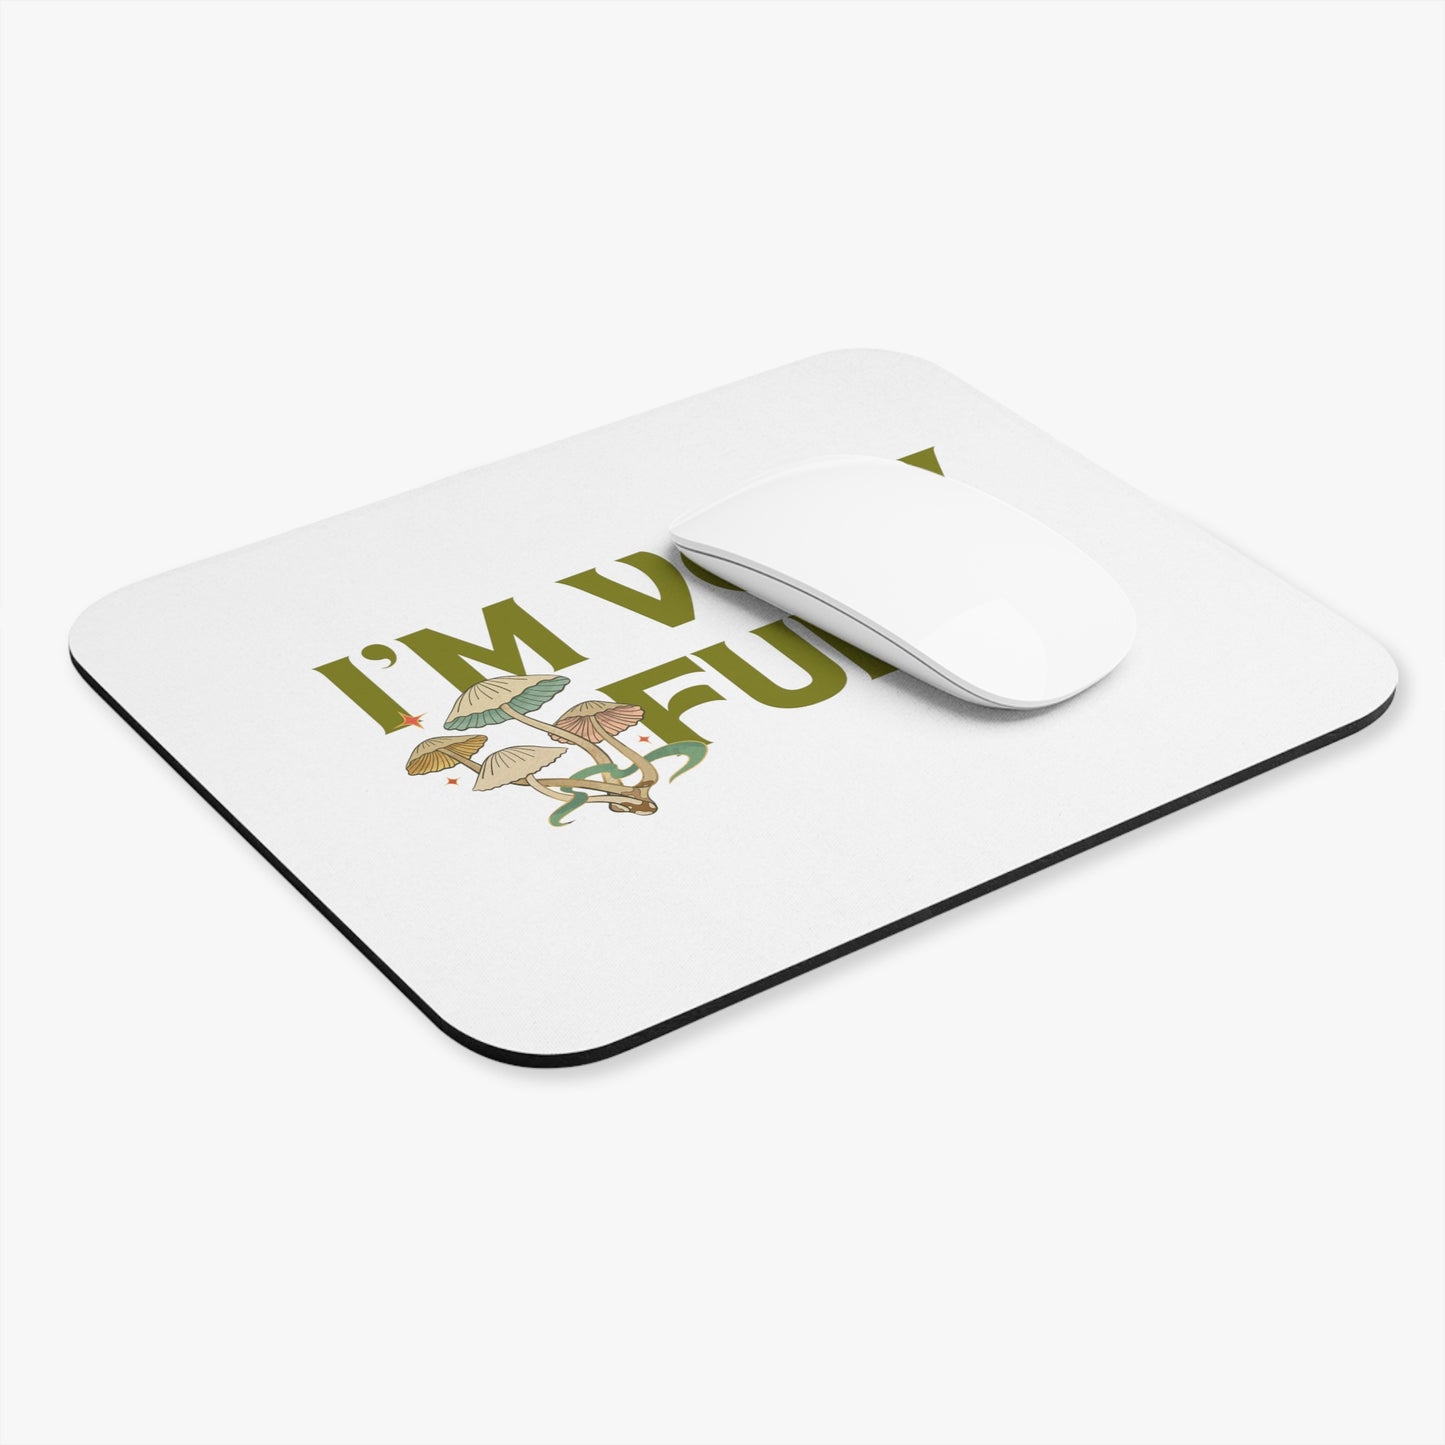 I'm Very Fungi Mouse Pad for Mushroom & Plant Lovers